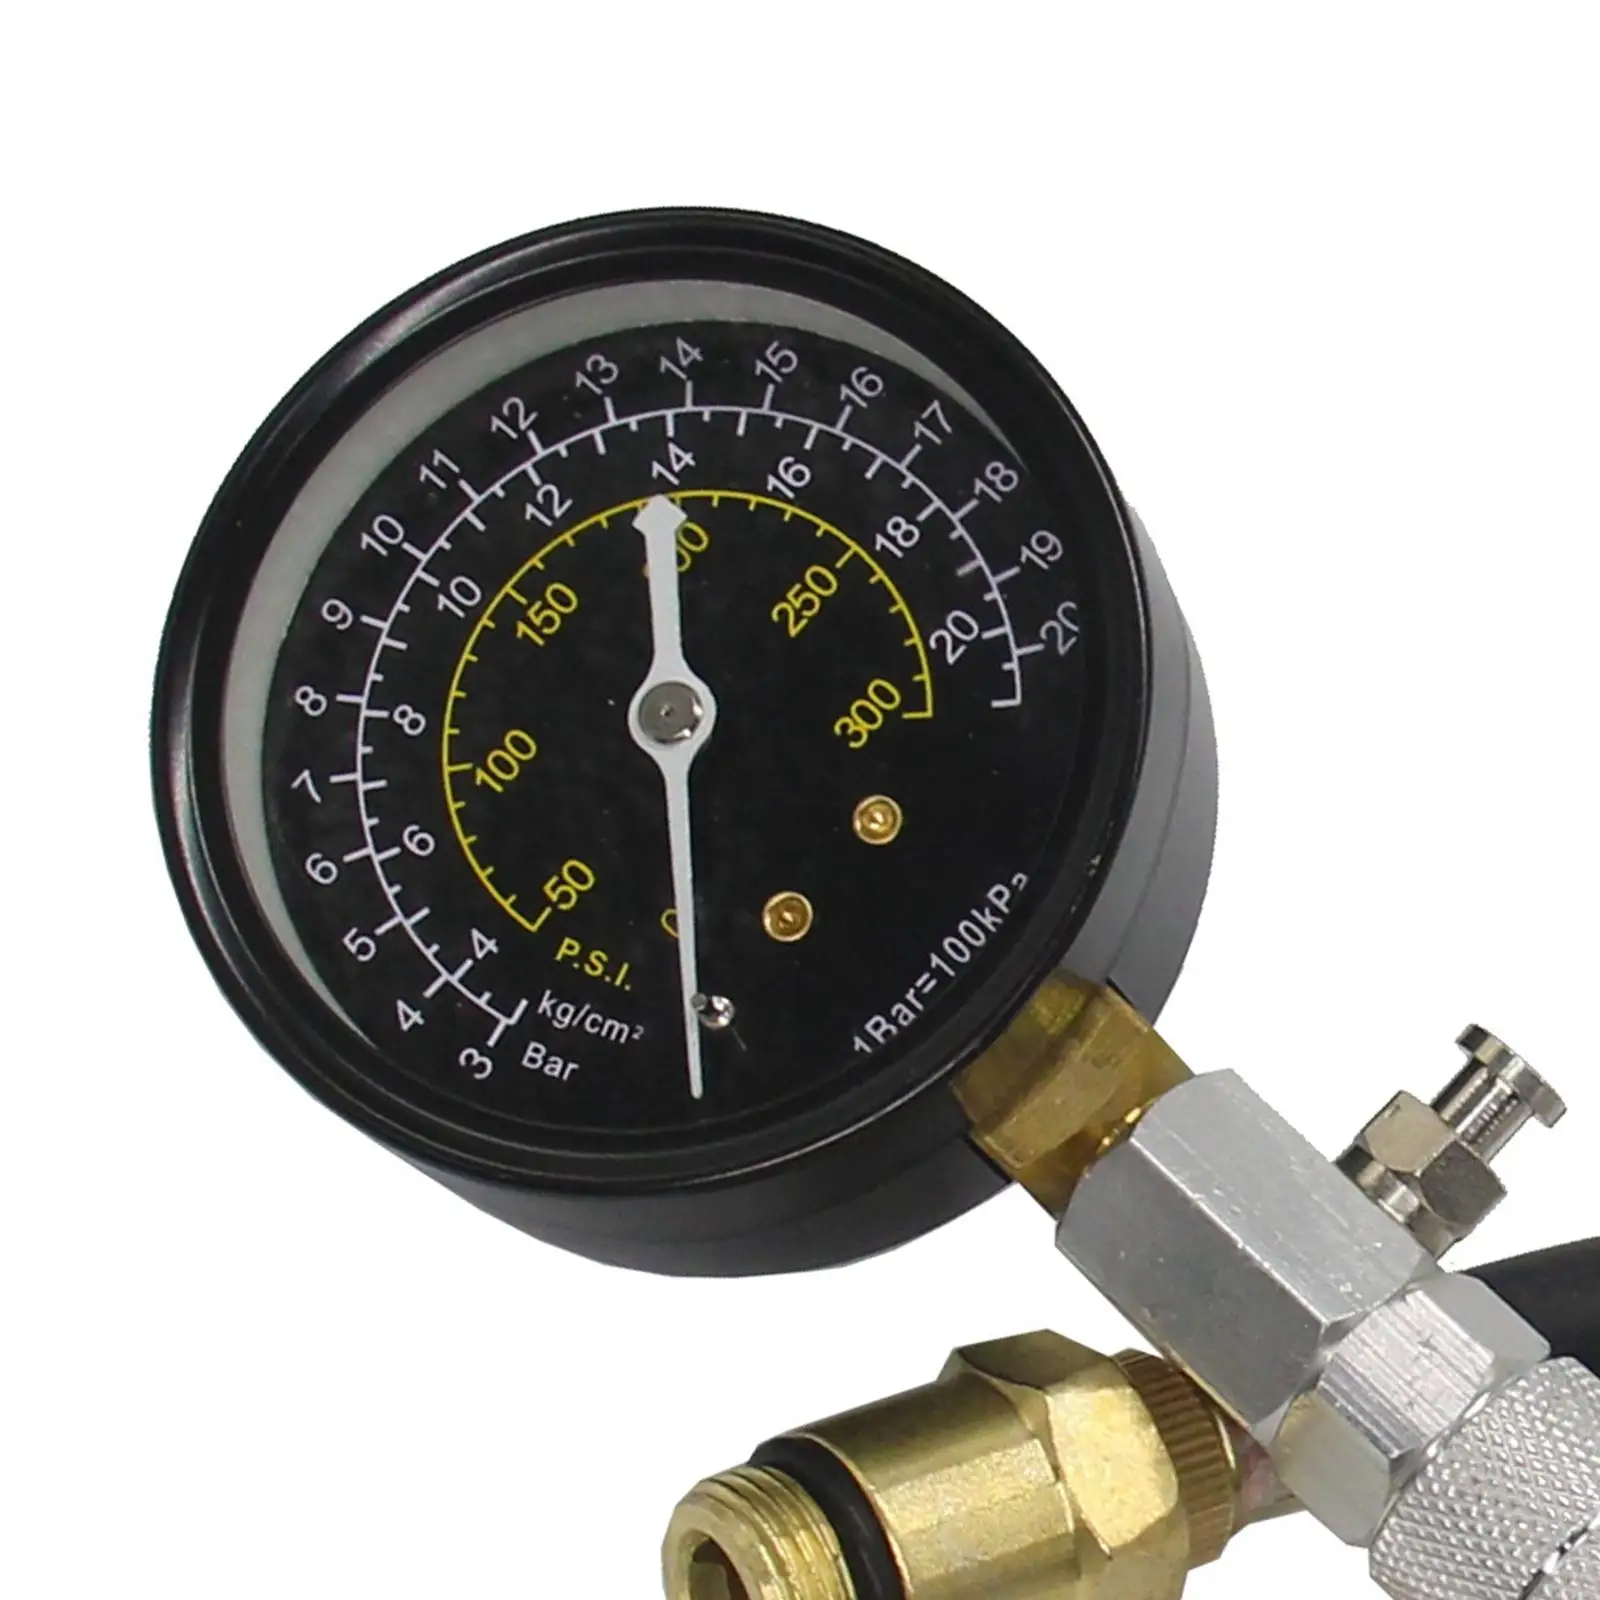 Compression 300 PSI Check Test Meter Auto 2000Kpa Pressure for Motorcycle Gasoline Engines Car Truck